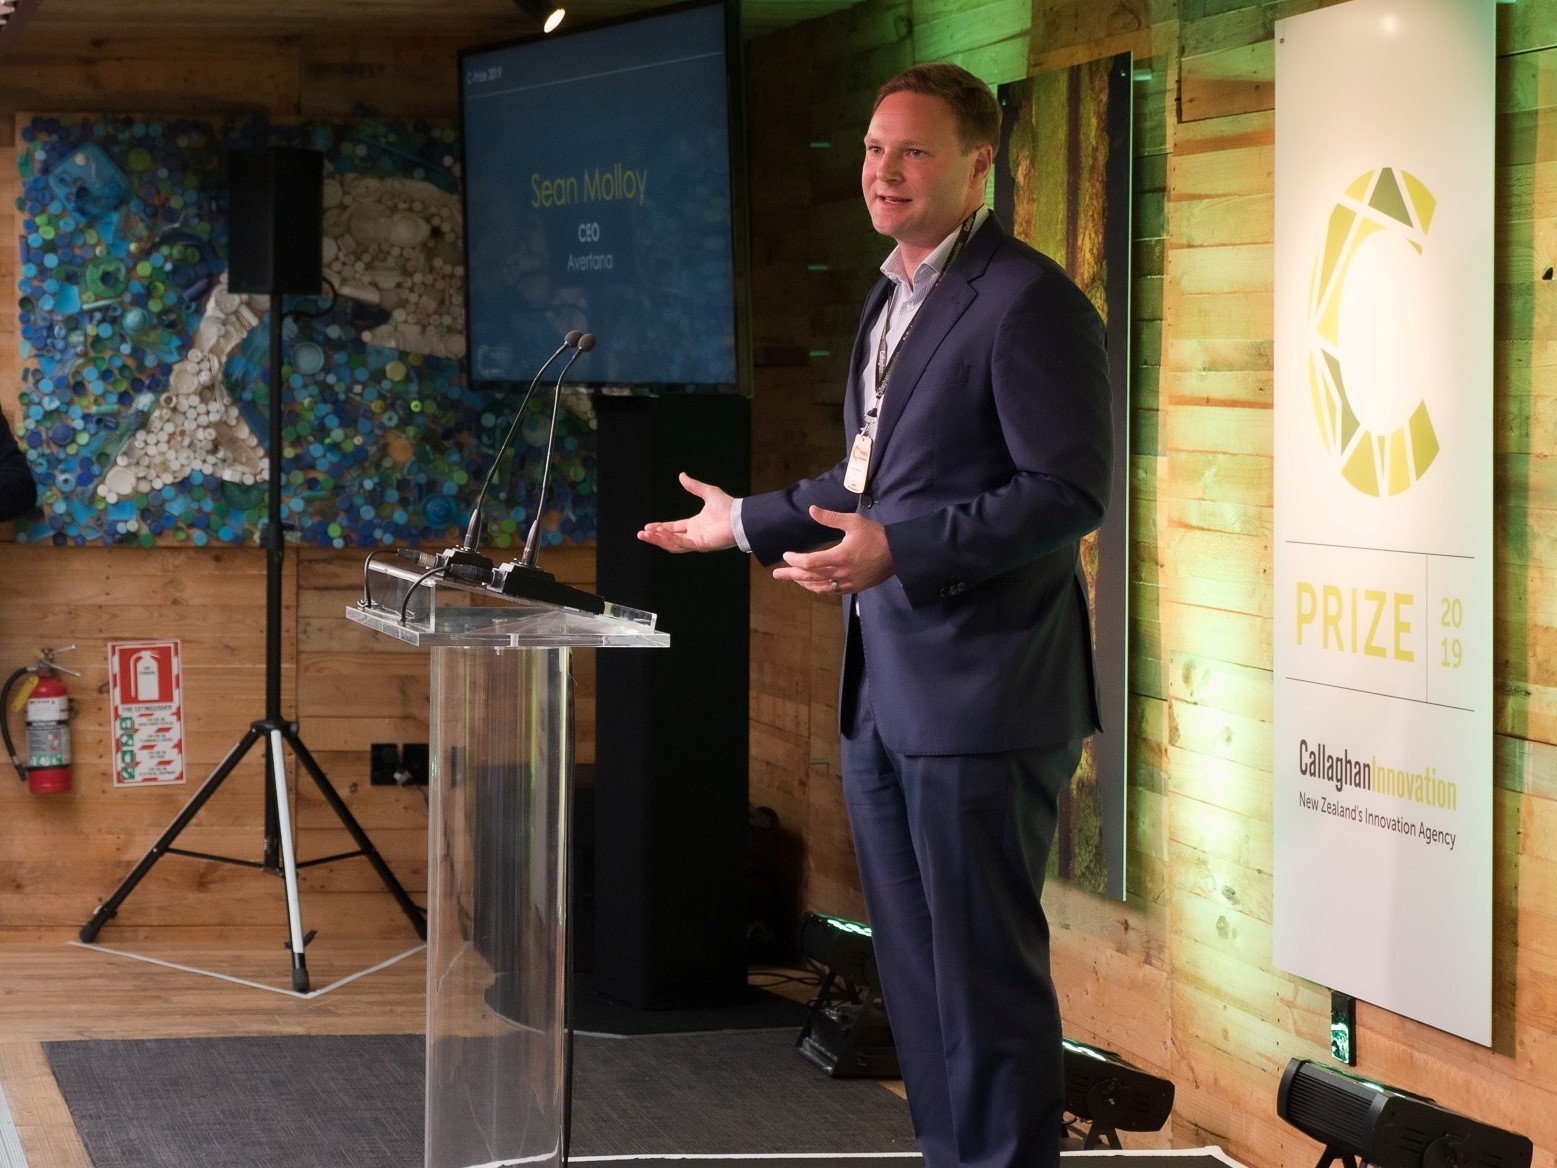 Sean Molloy at C-Prize 2019 launch